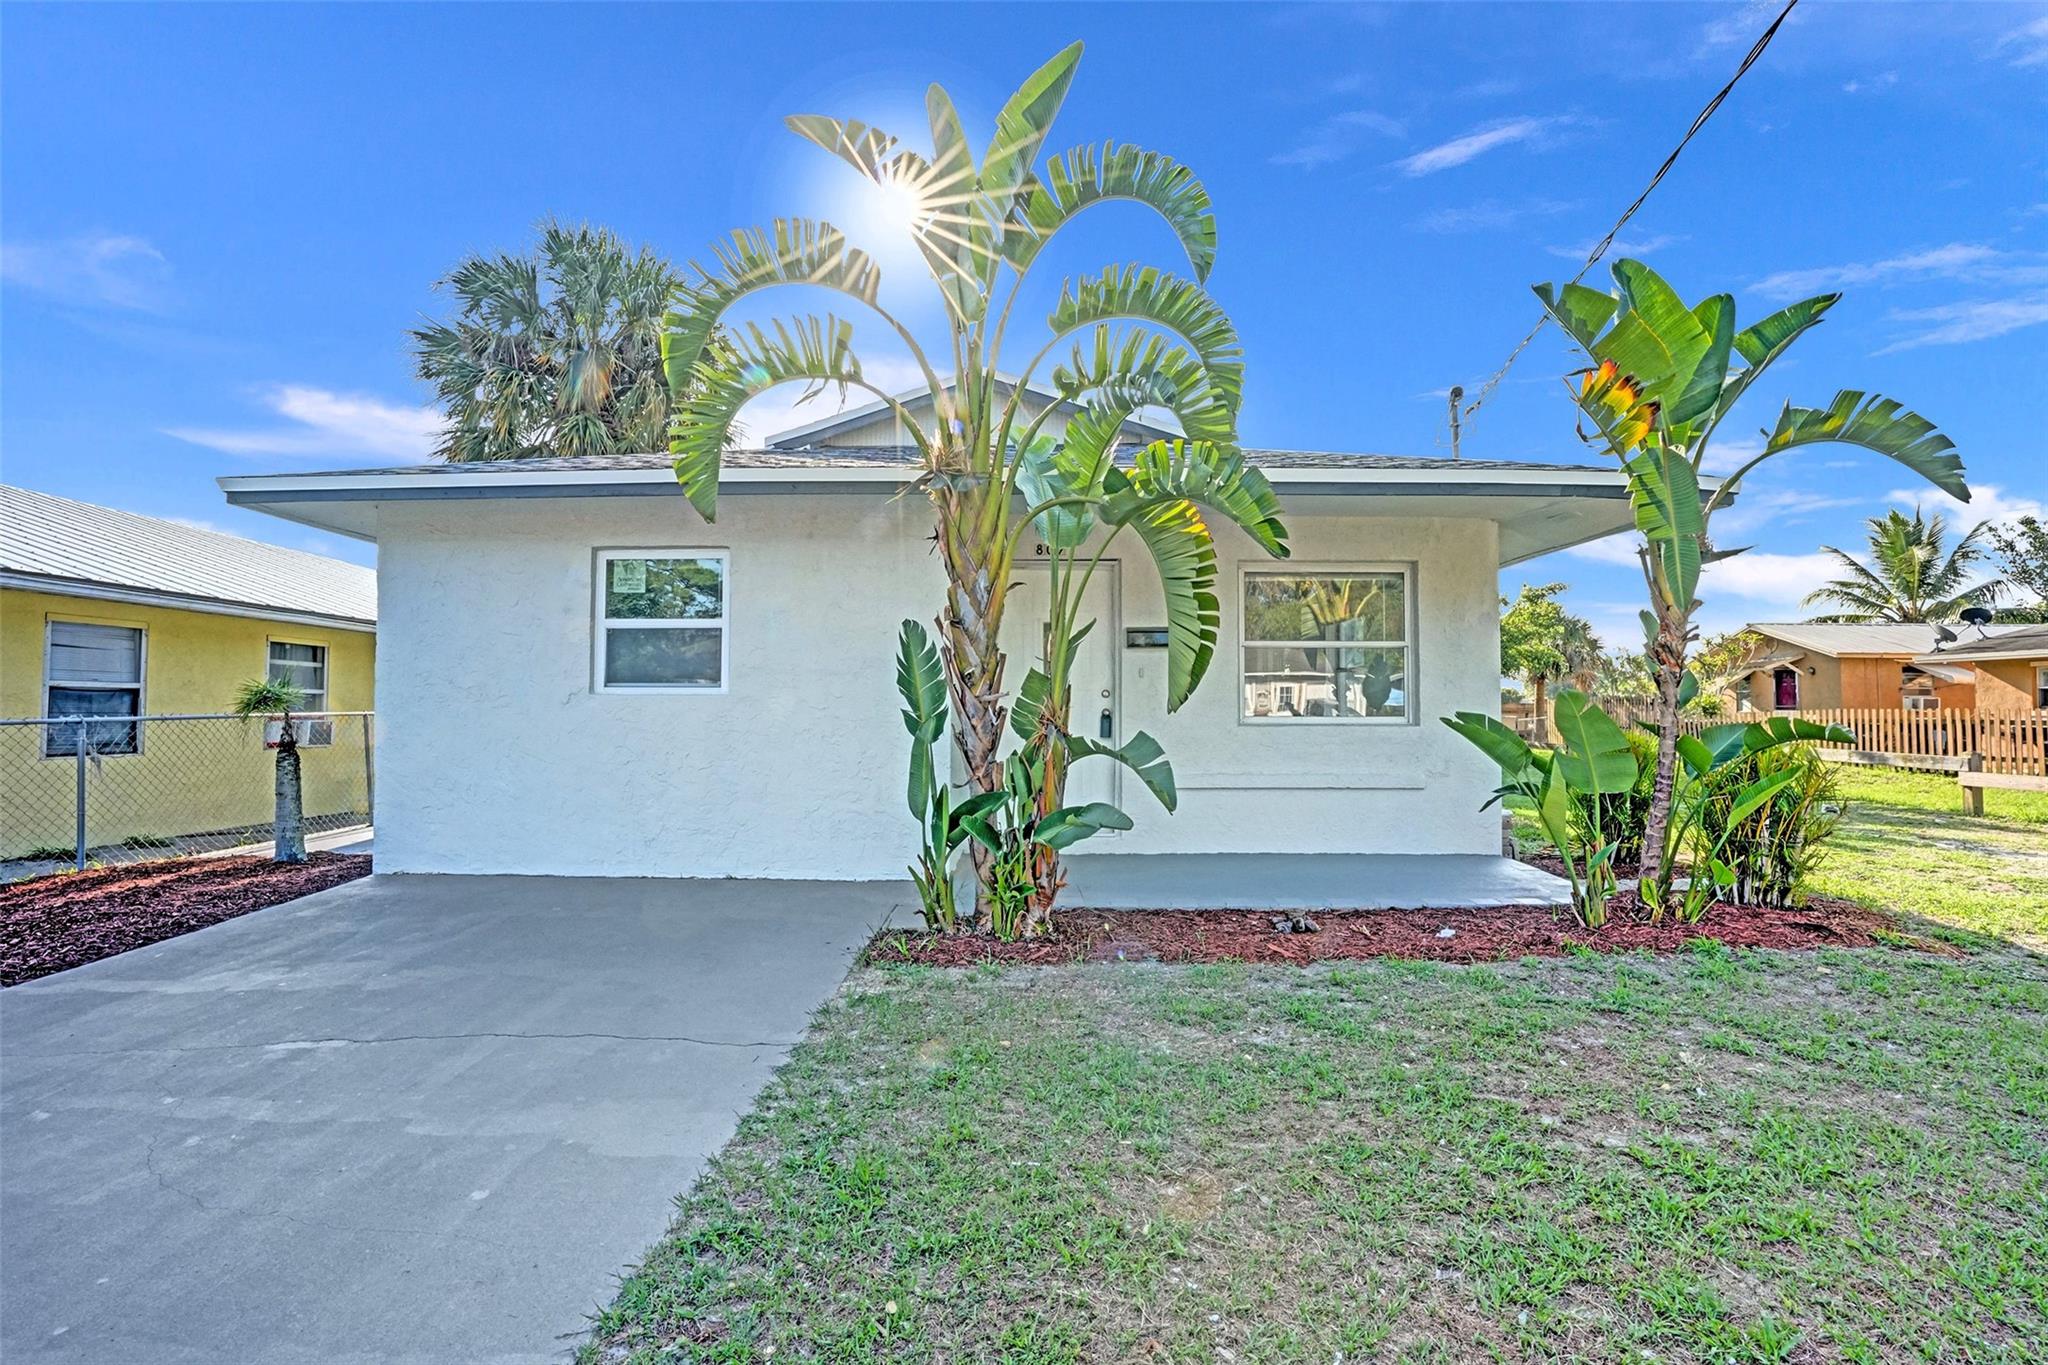 Welcome to your dream home in the heart of Stuart! This charming 3-bedroom, 1-bath gem has been completely remodeled inside and out. Step into a modern oasis featuring a renovated kitchen and bathroom, new vinyl plank flooring throughout, and a brand-new stove and washer. With a new roof (2024) and new windows on half the house, your worries are a thing of the past. Enjoy a freshly painted driveway and a spacious yard perfect for outdoor fun. Plus, no HOA restrictions! Centrally located, this home is ready for you to move in and start making memories. Don't miss out!